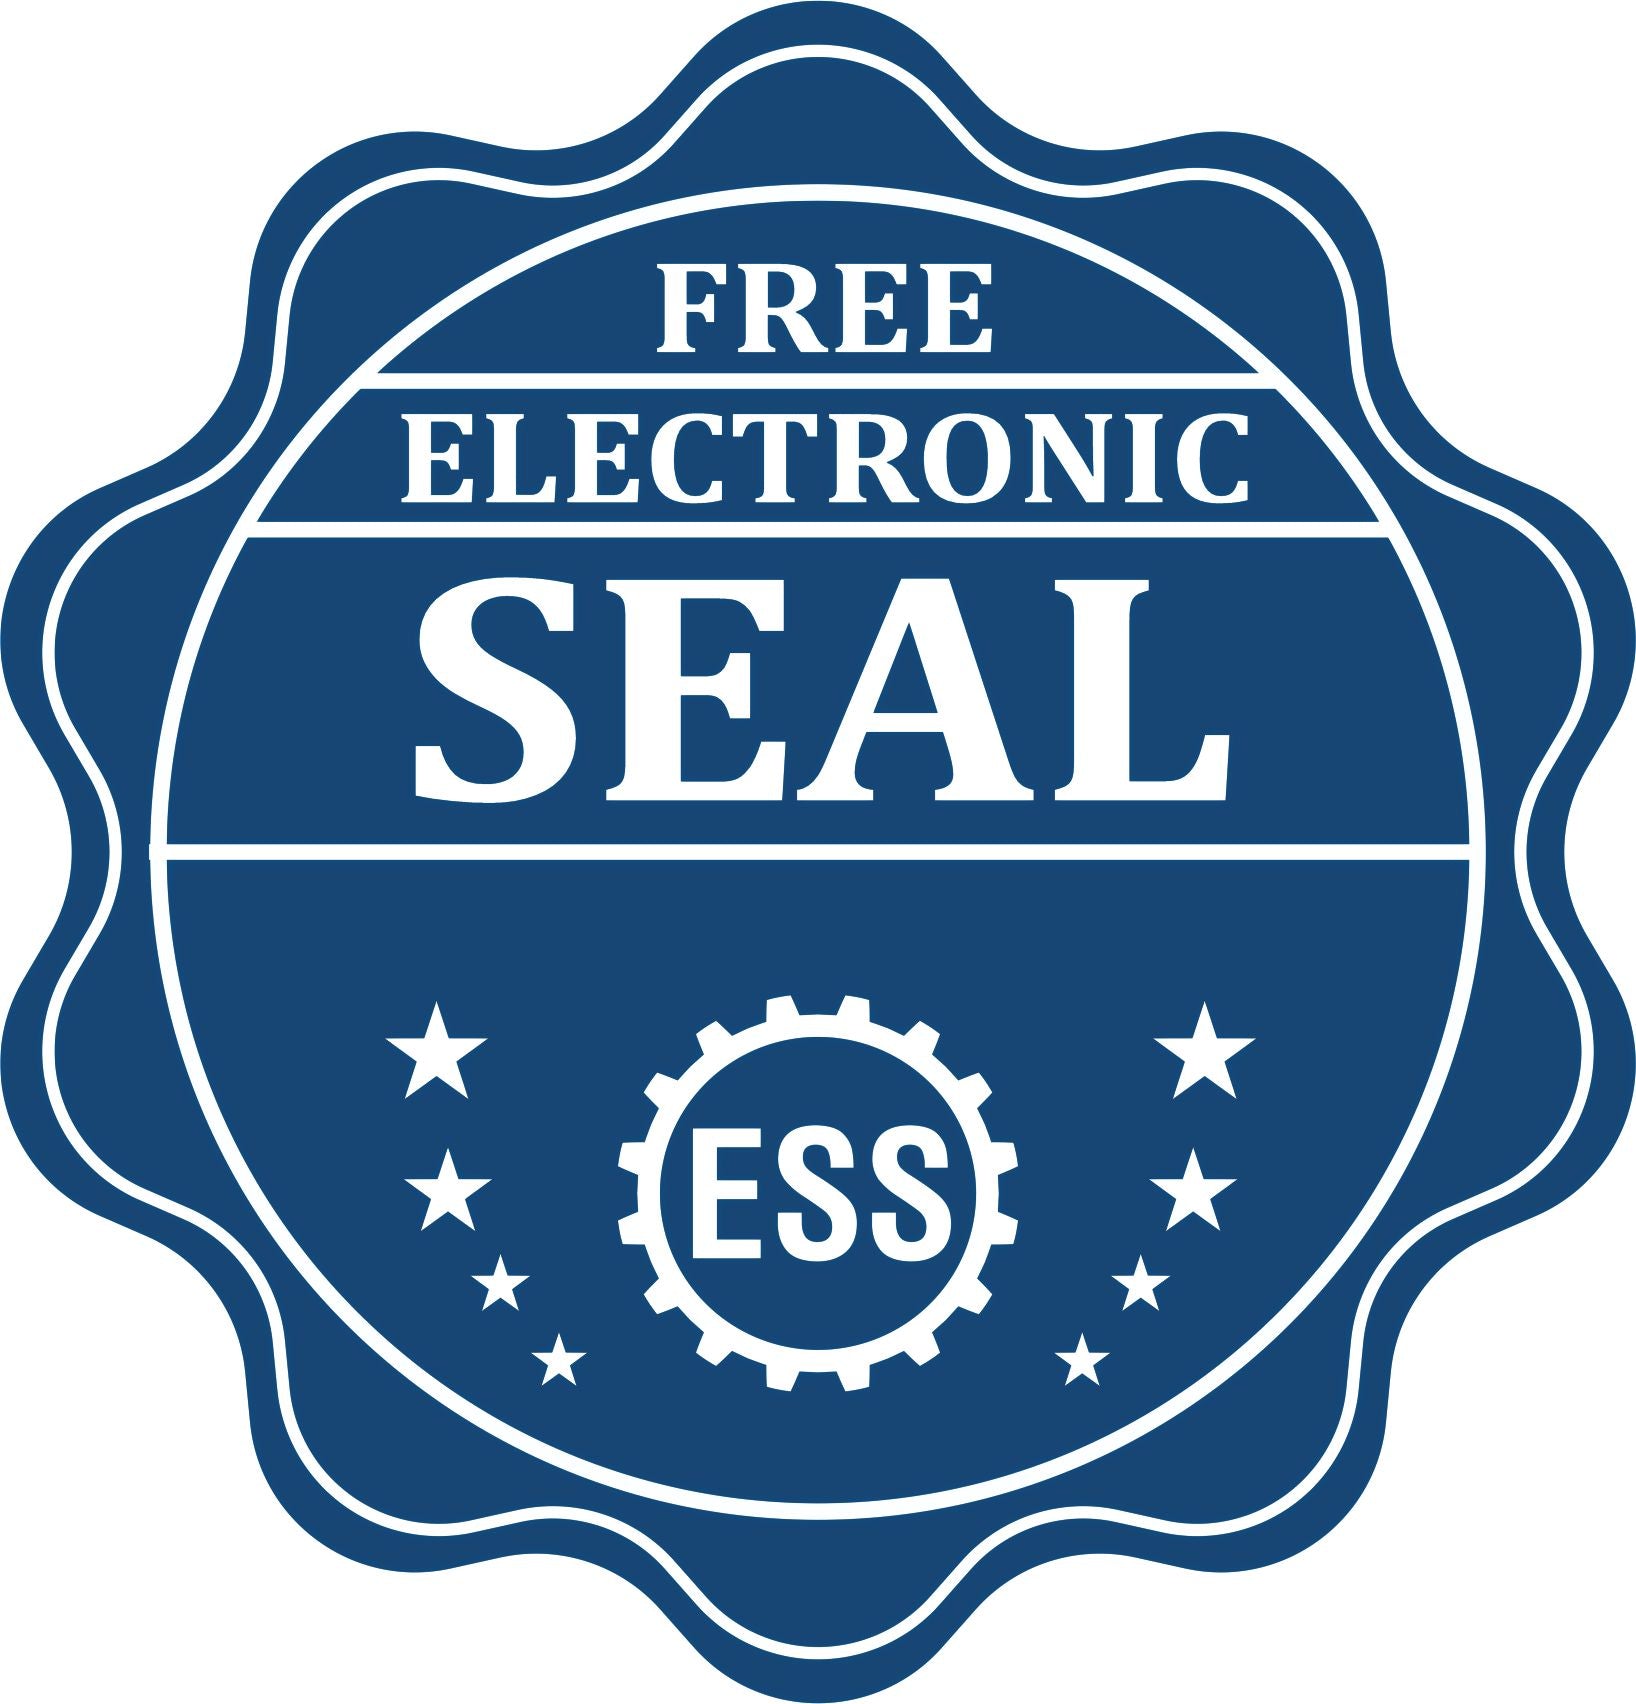 A badge showing a free electronic seal for the Slim Pre-Inked Kansas Land Surveyor Seal Stamp with stars and the ESS gear on the emblem.